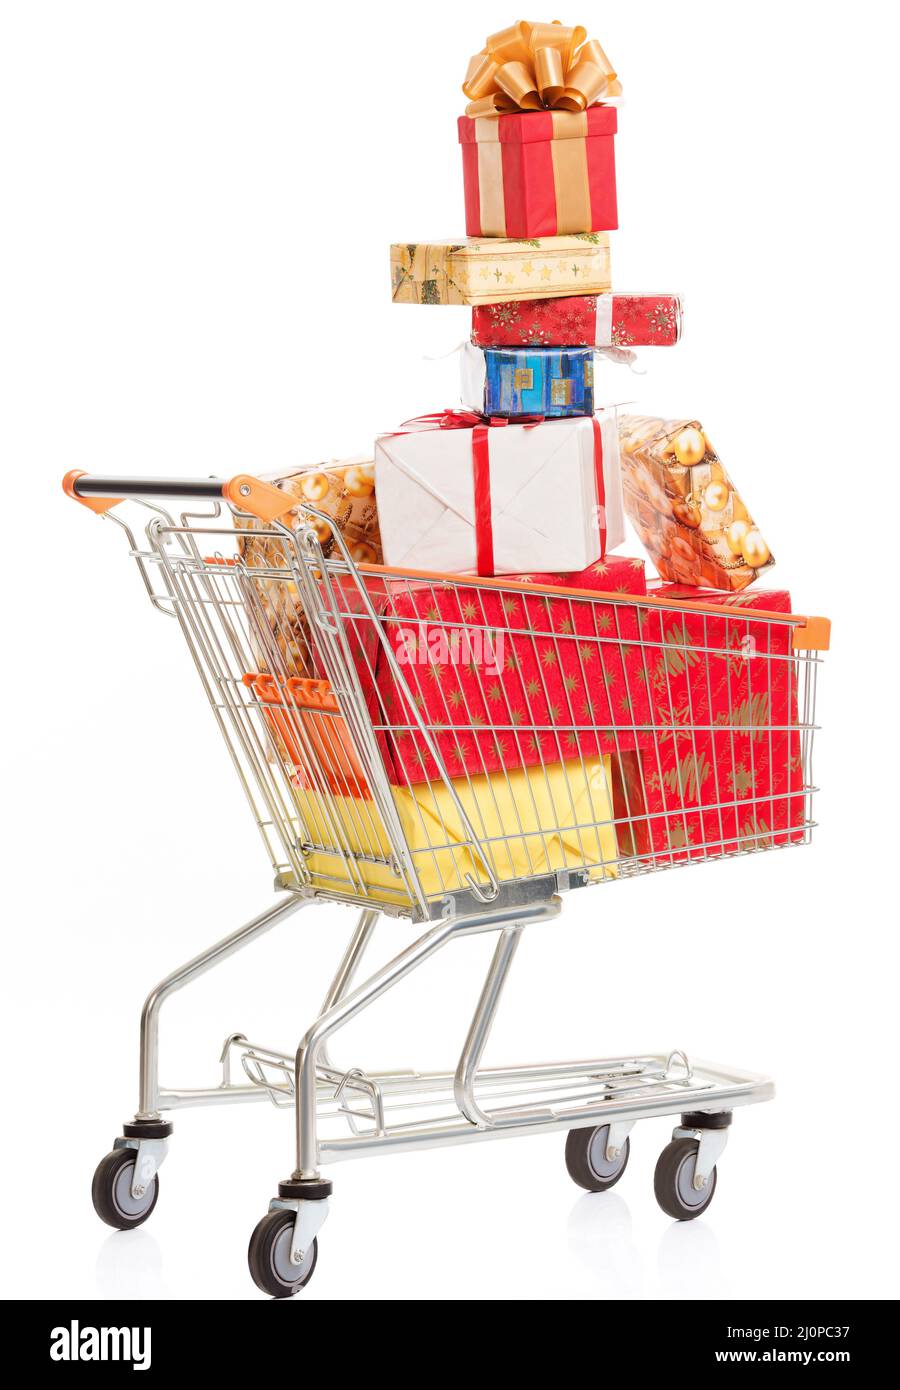 Pyramid of Christmas Gifts, Multicolored Boxes Fill a Shopping Cart on a White Background. Christmas Shopping Season. Close-up Stock Photo